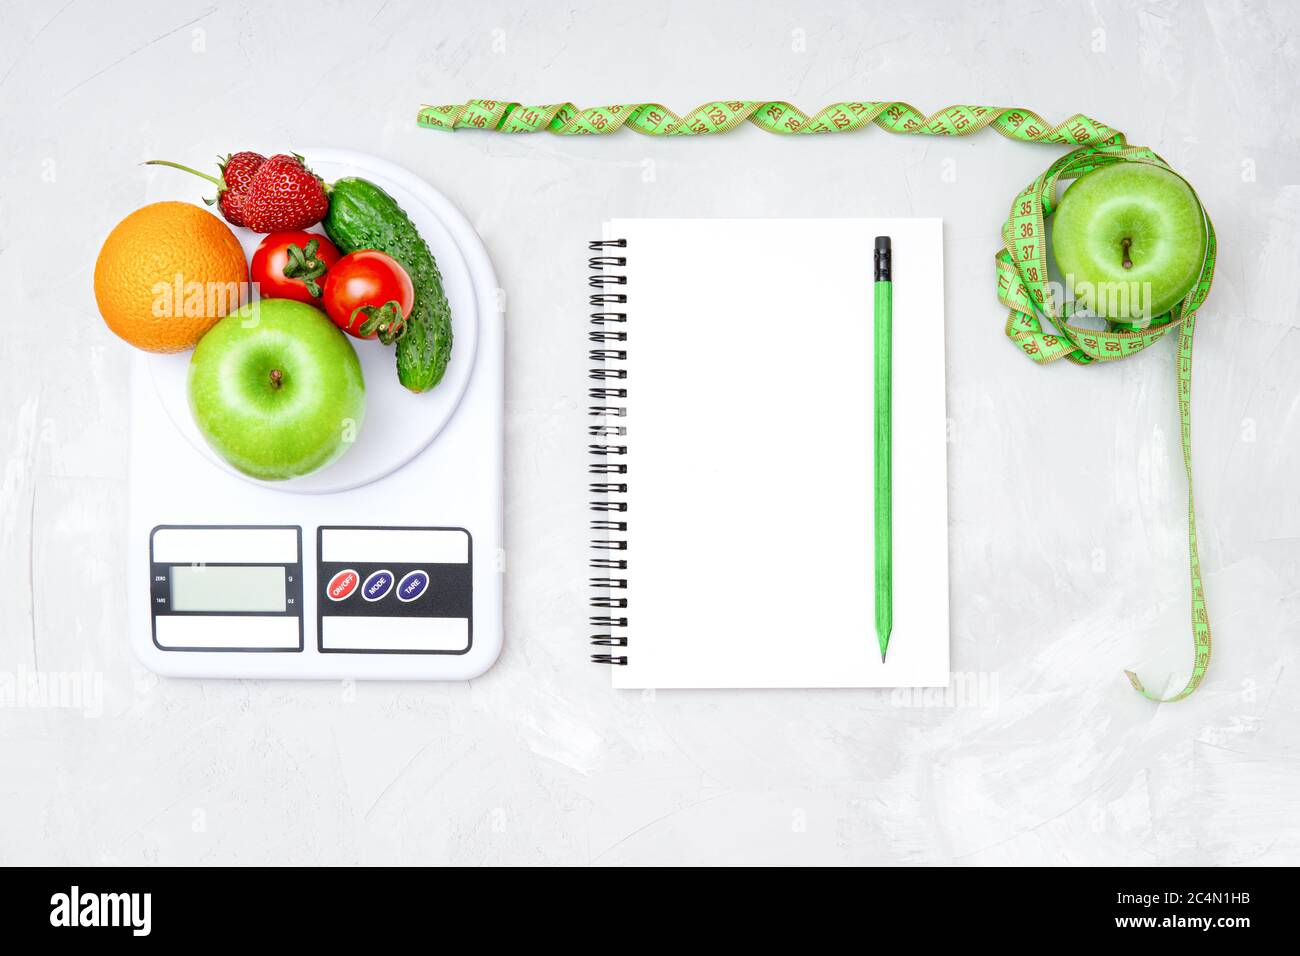 Healthy weight loss meal plan. Flat lay of a whole apple wrapped with measuring tape, kitchen scales with vegetables and fruits, blank paper notebook Stock Photo